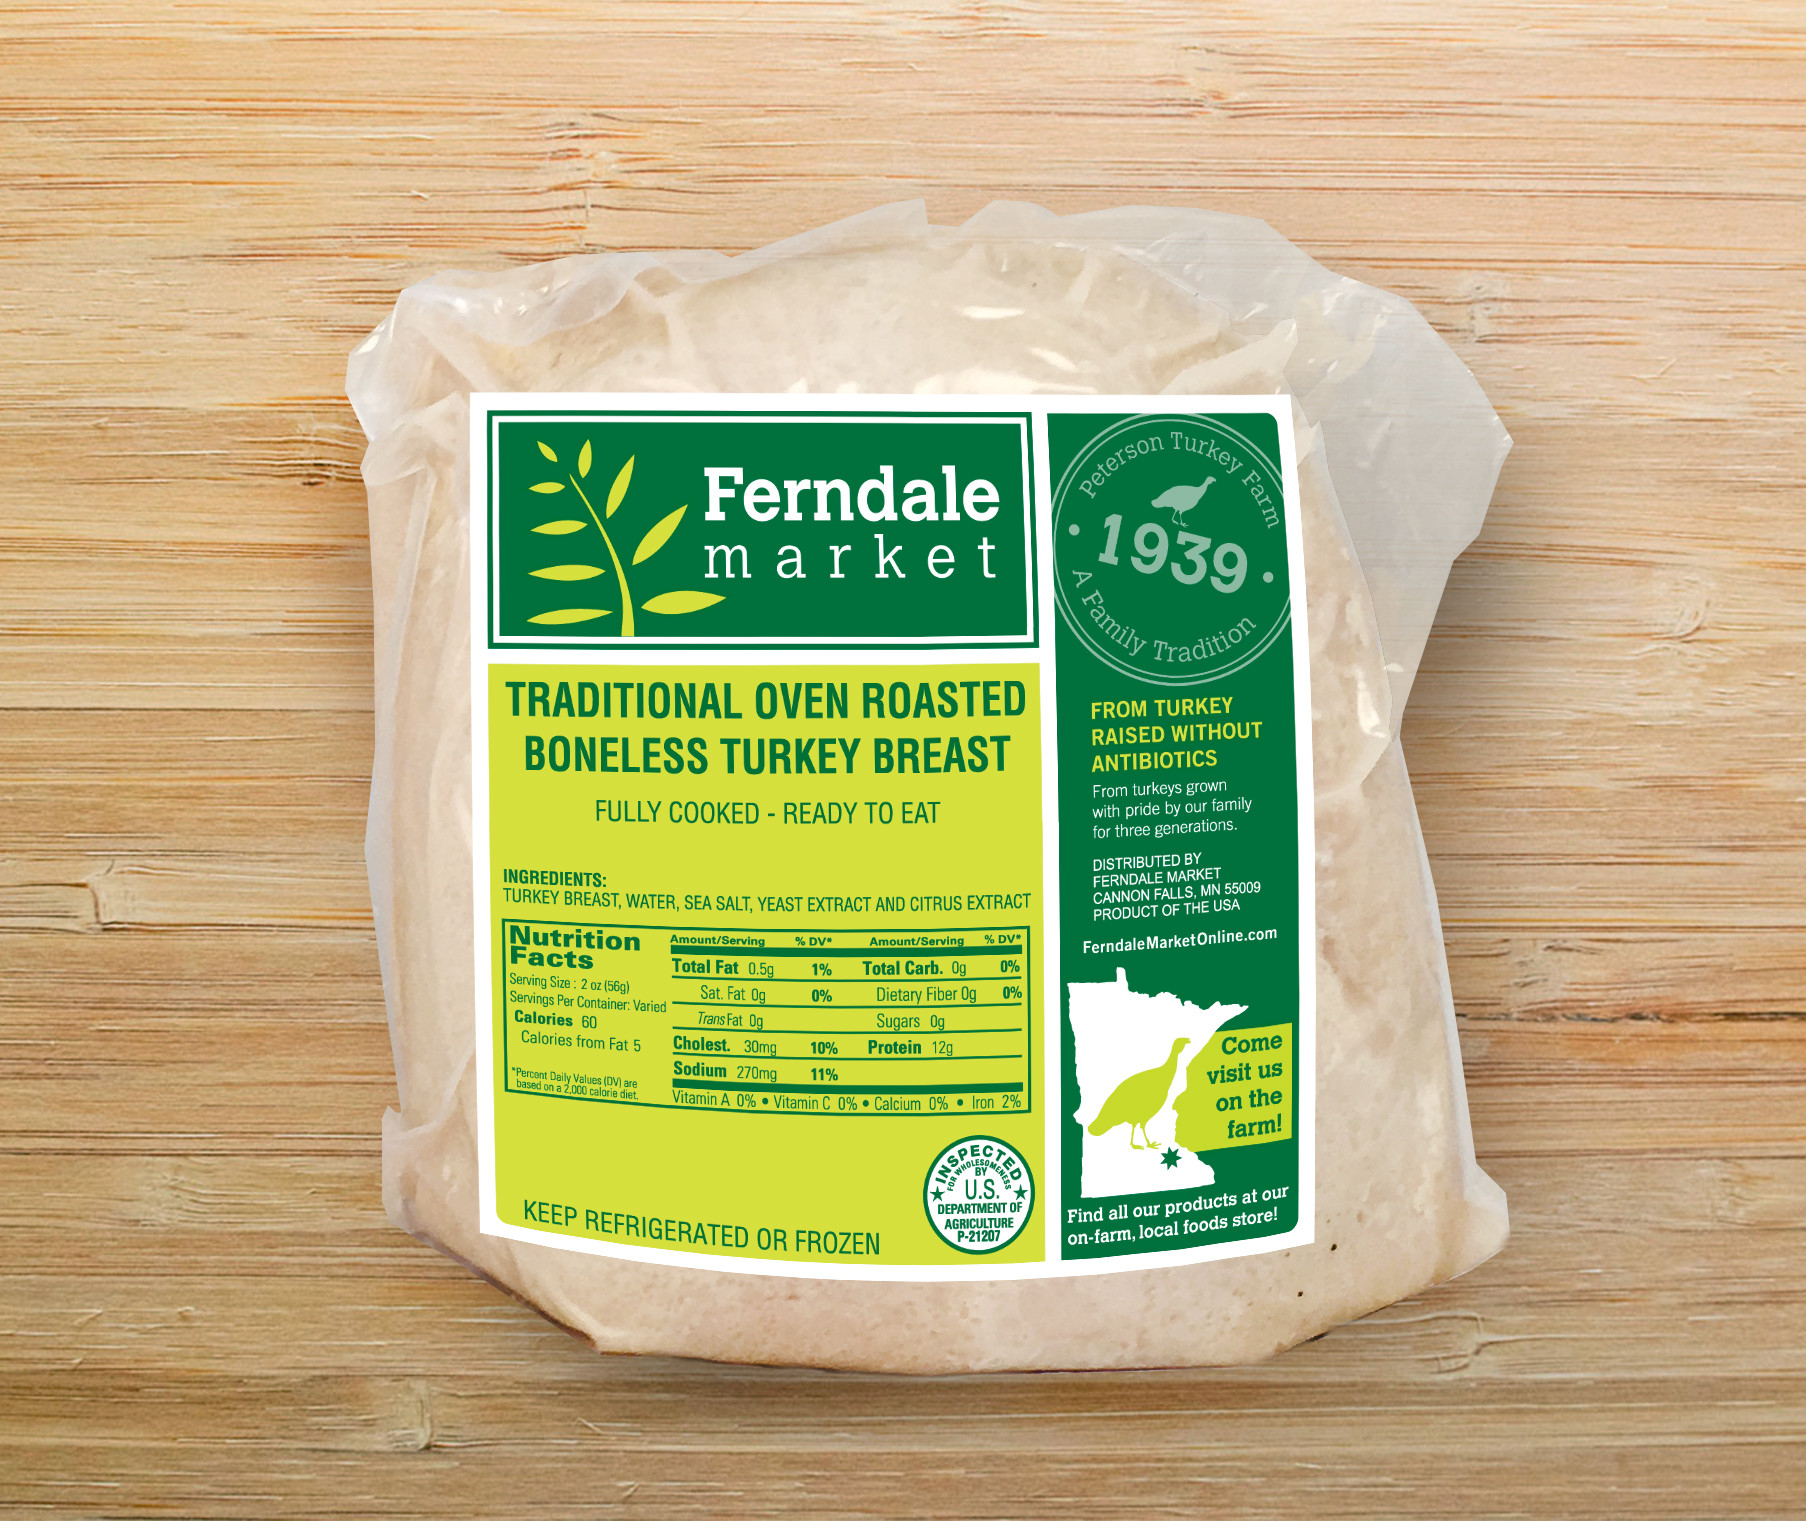 Pre Cooked Thanksgiving Dinner 2019
 New Ferndale Turkey Product Oven Roasted Turkey Breast